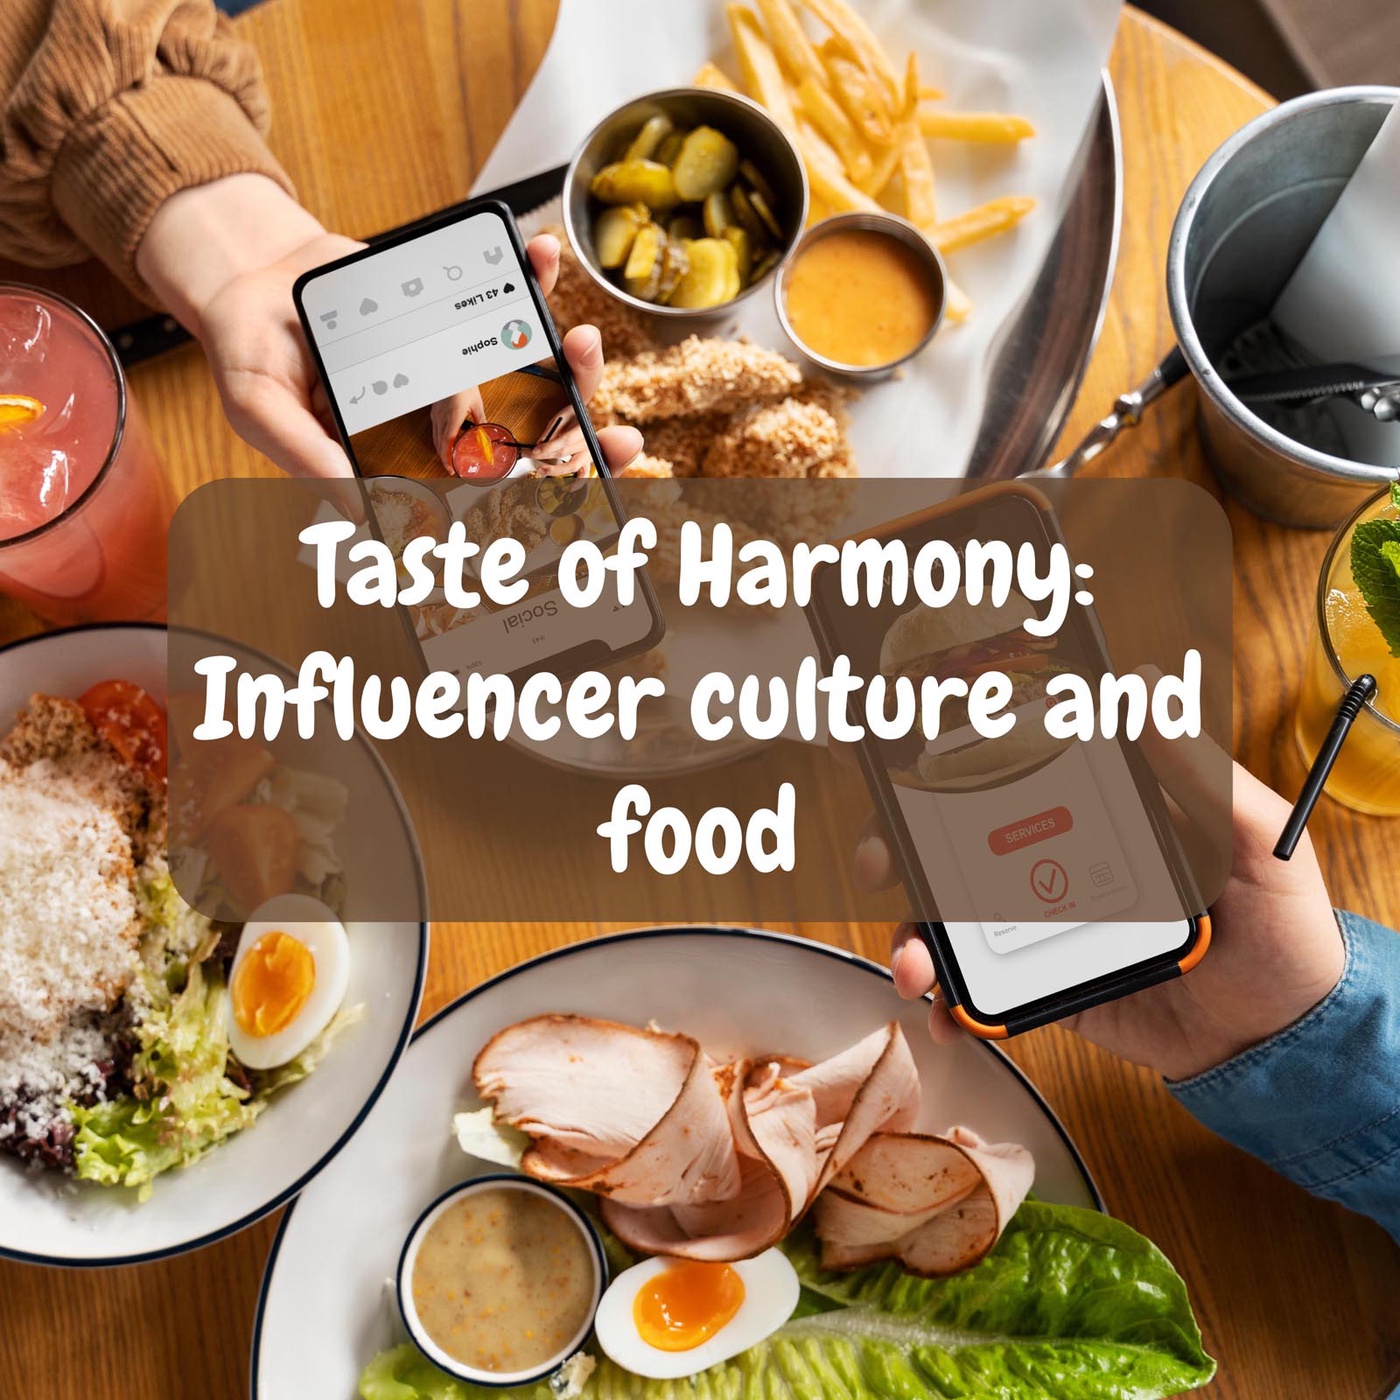 Food habits and how they are influenced by social media - a dicussion with international participants